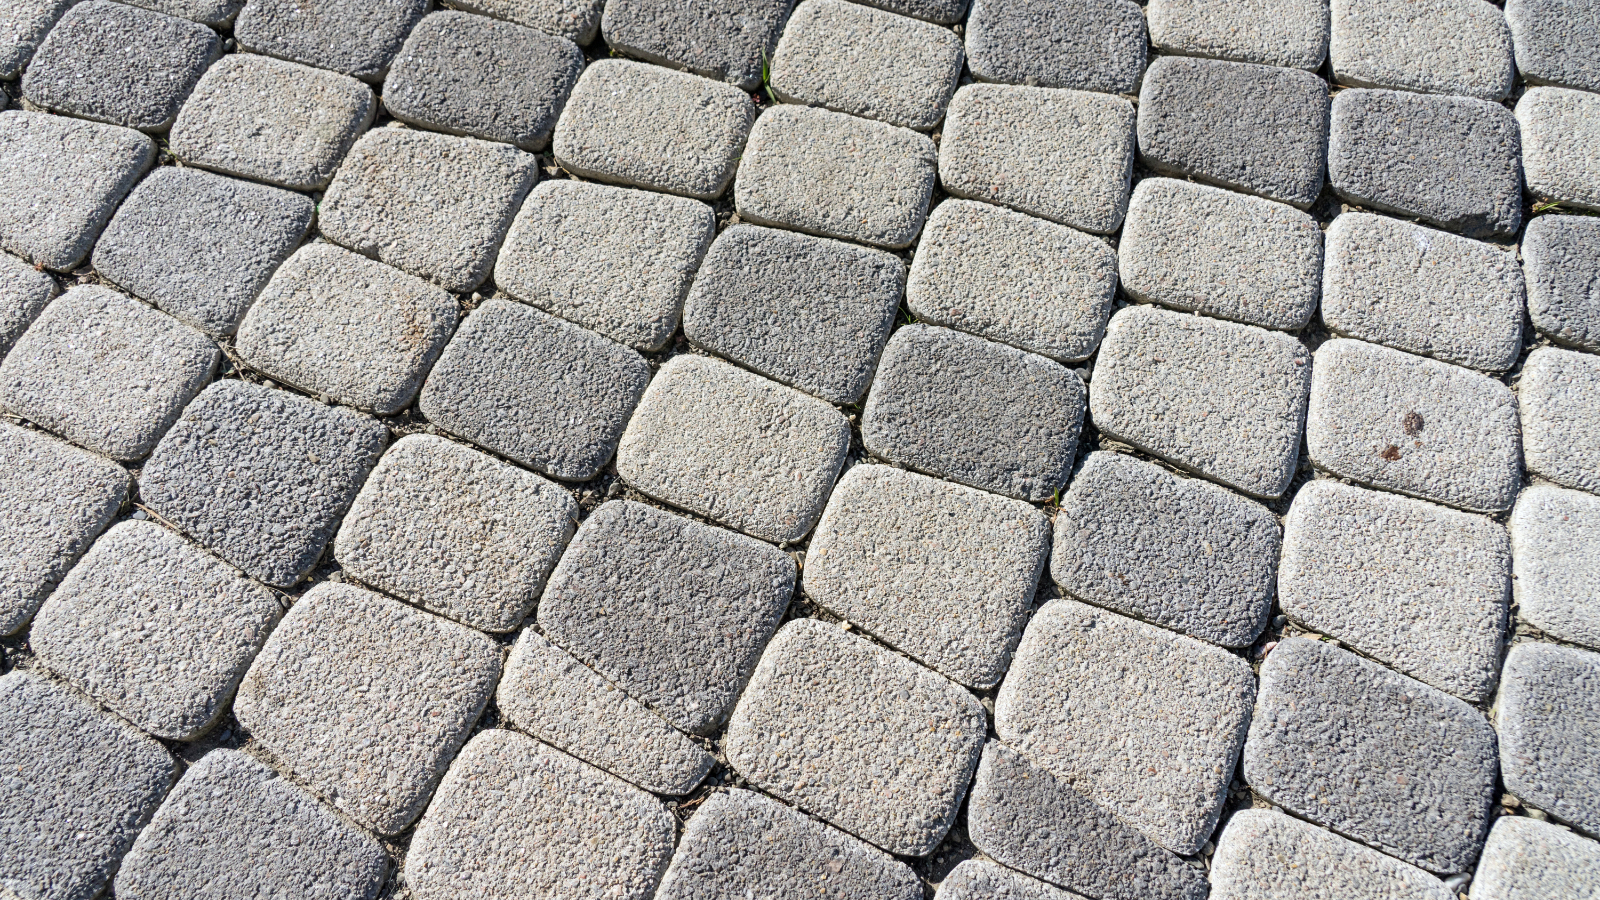 Paving Materials - How Long Does It Take To Install Paving?